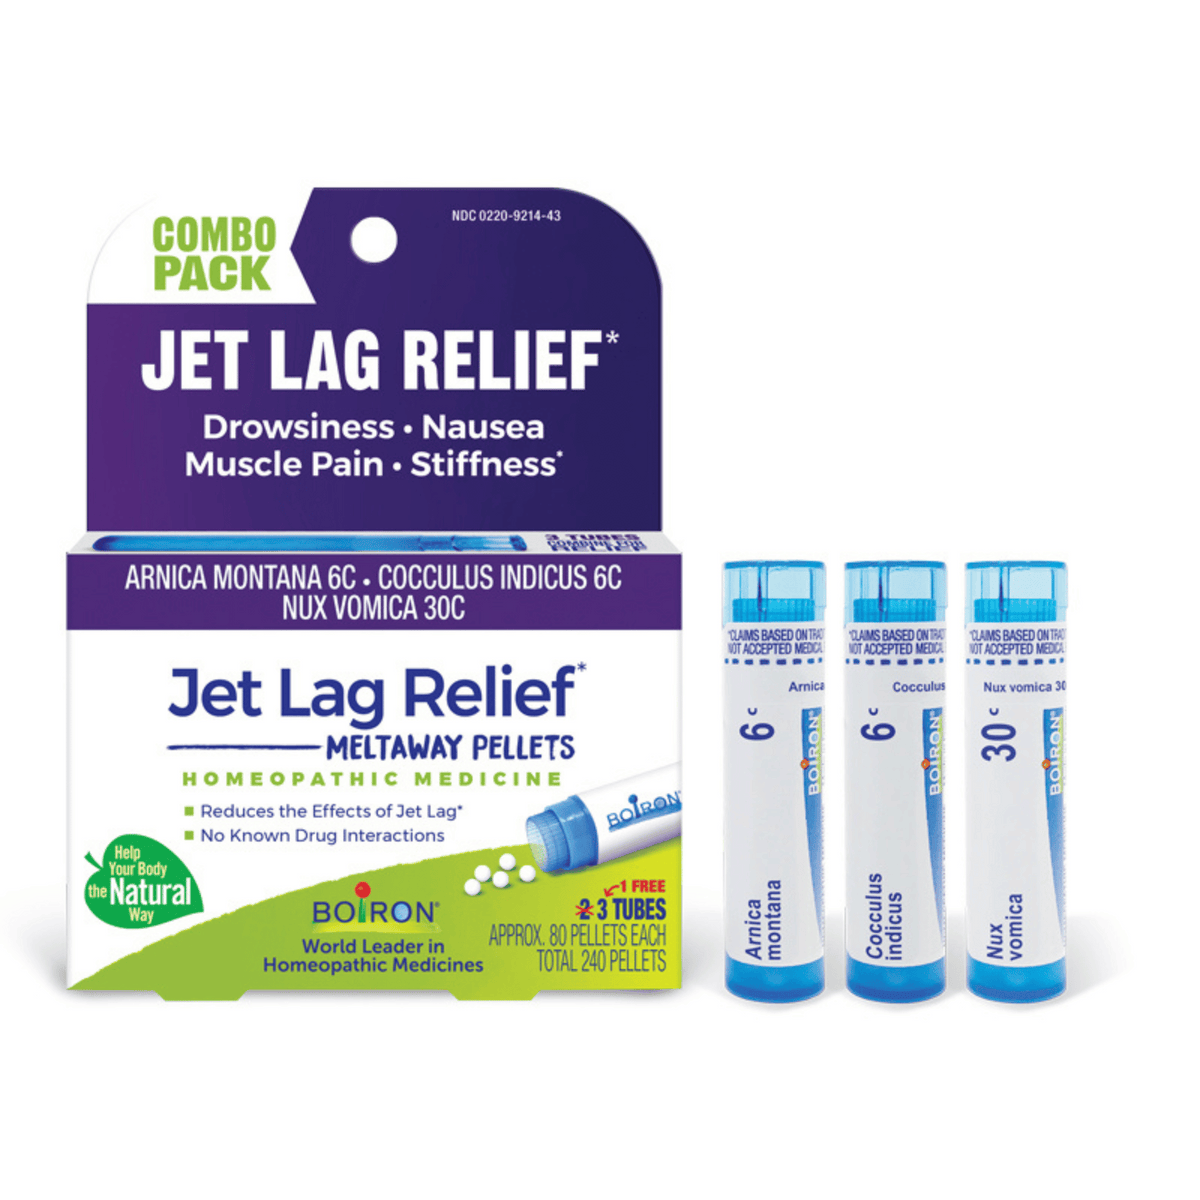 Primary Image of Jet Lag Relief